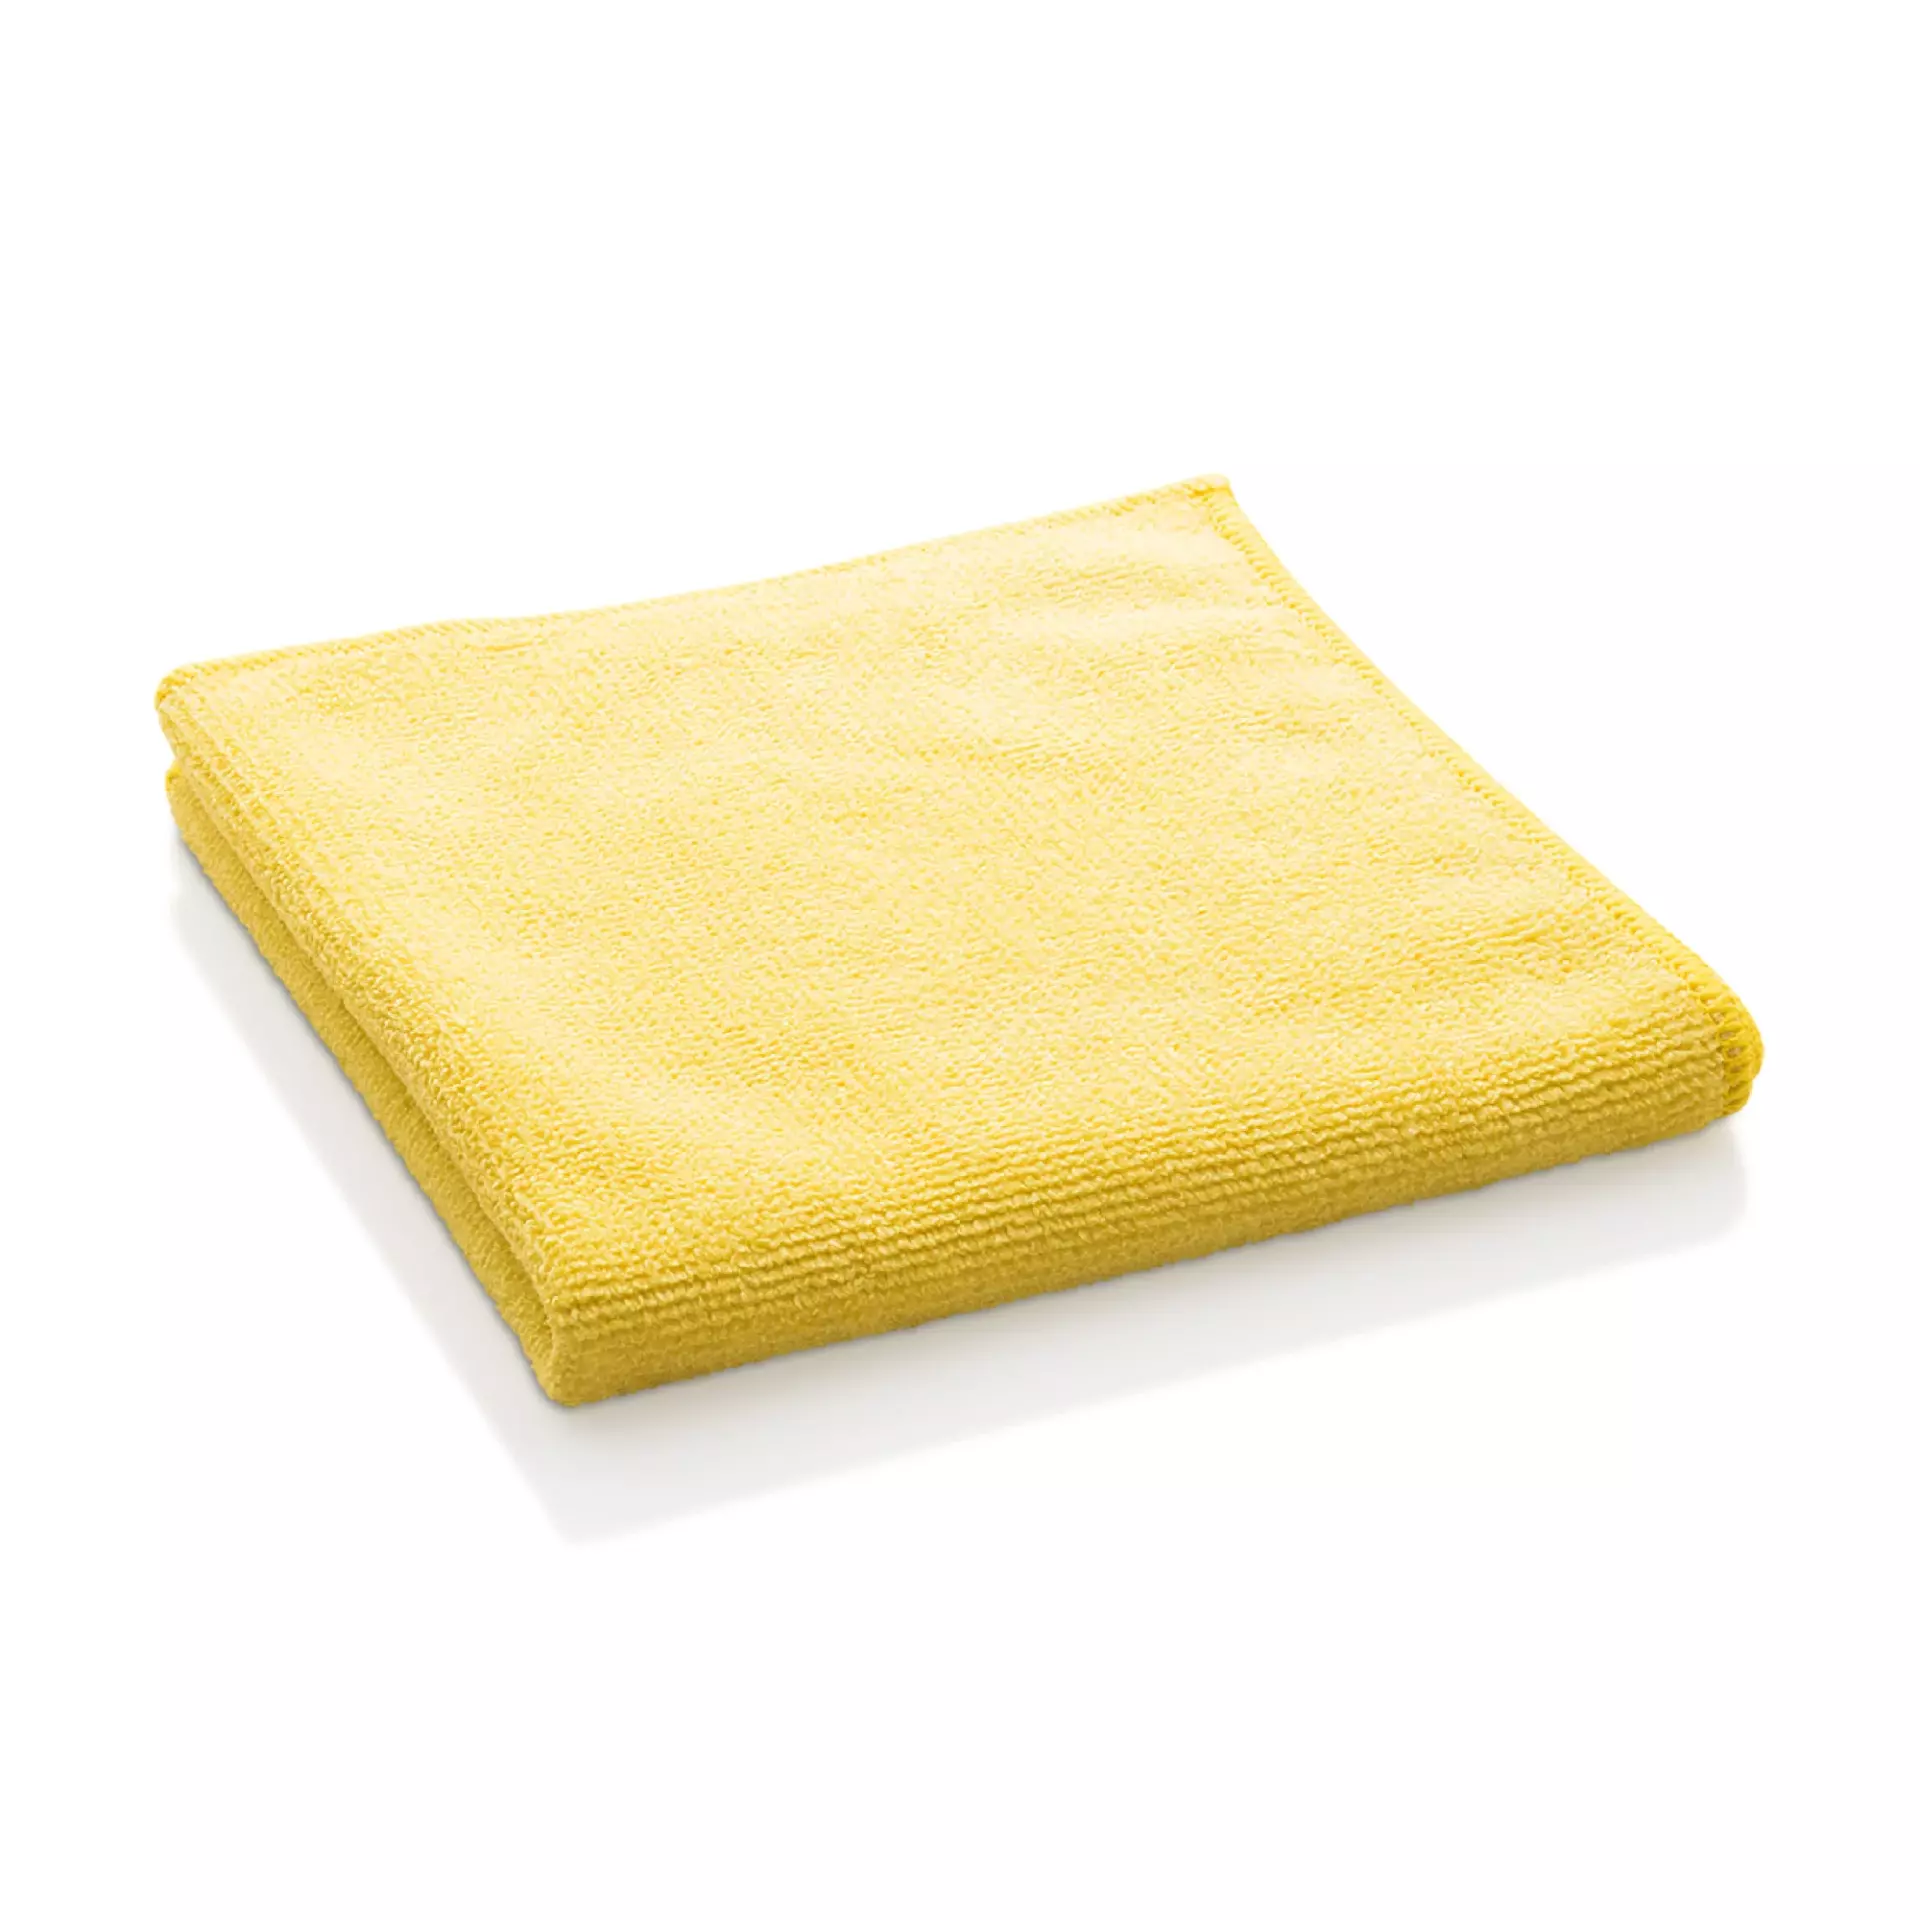 E-Cloth Bathroom Cleaning Pack Product Image 2